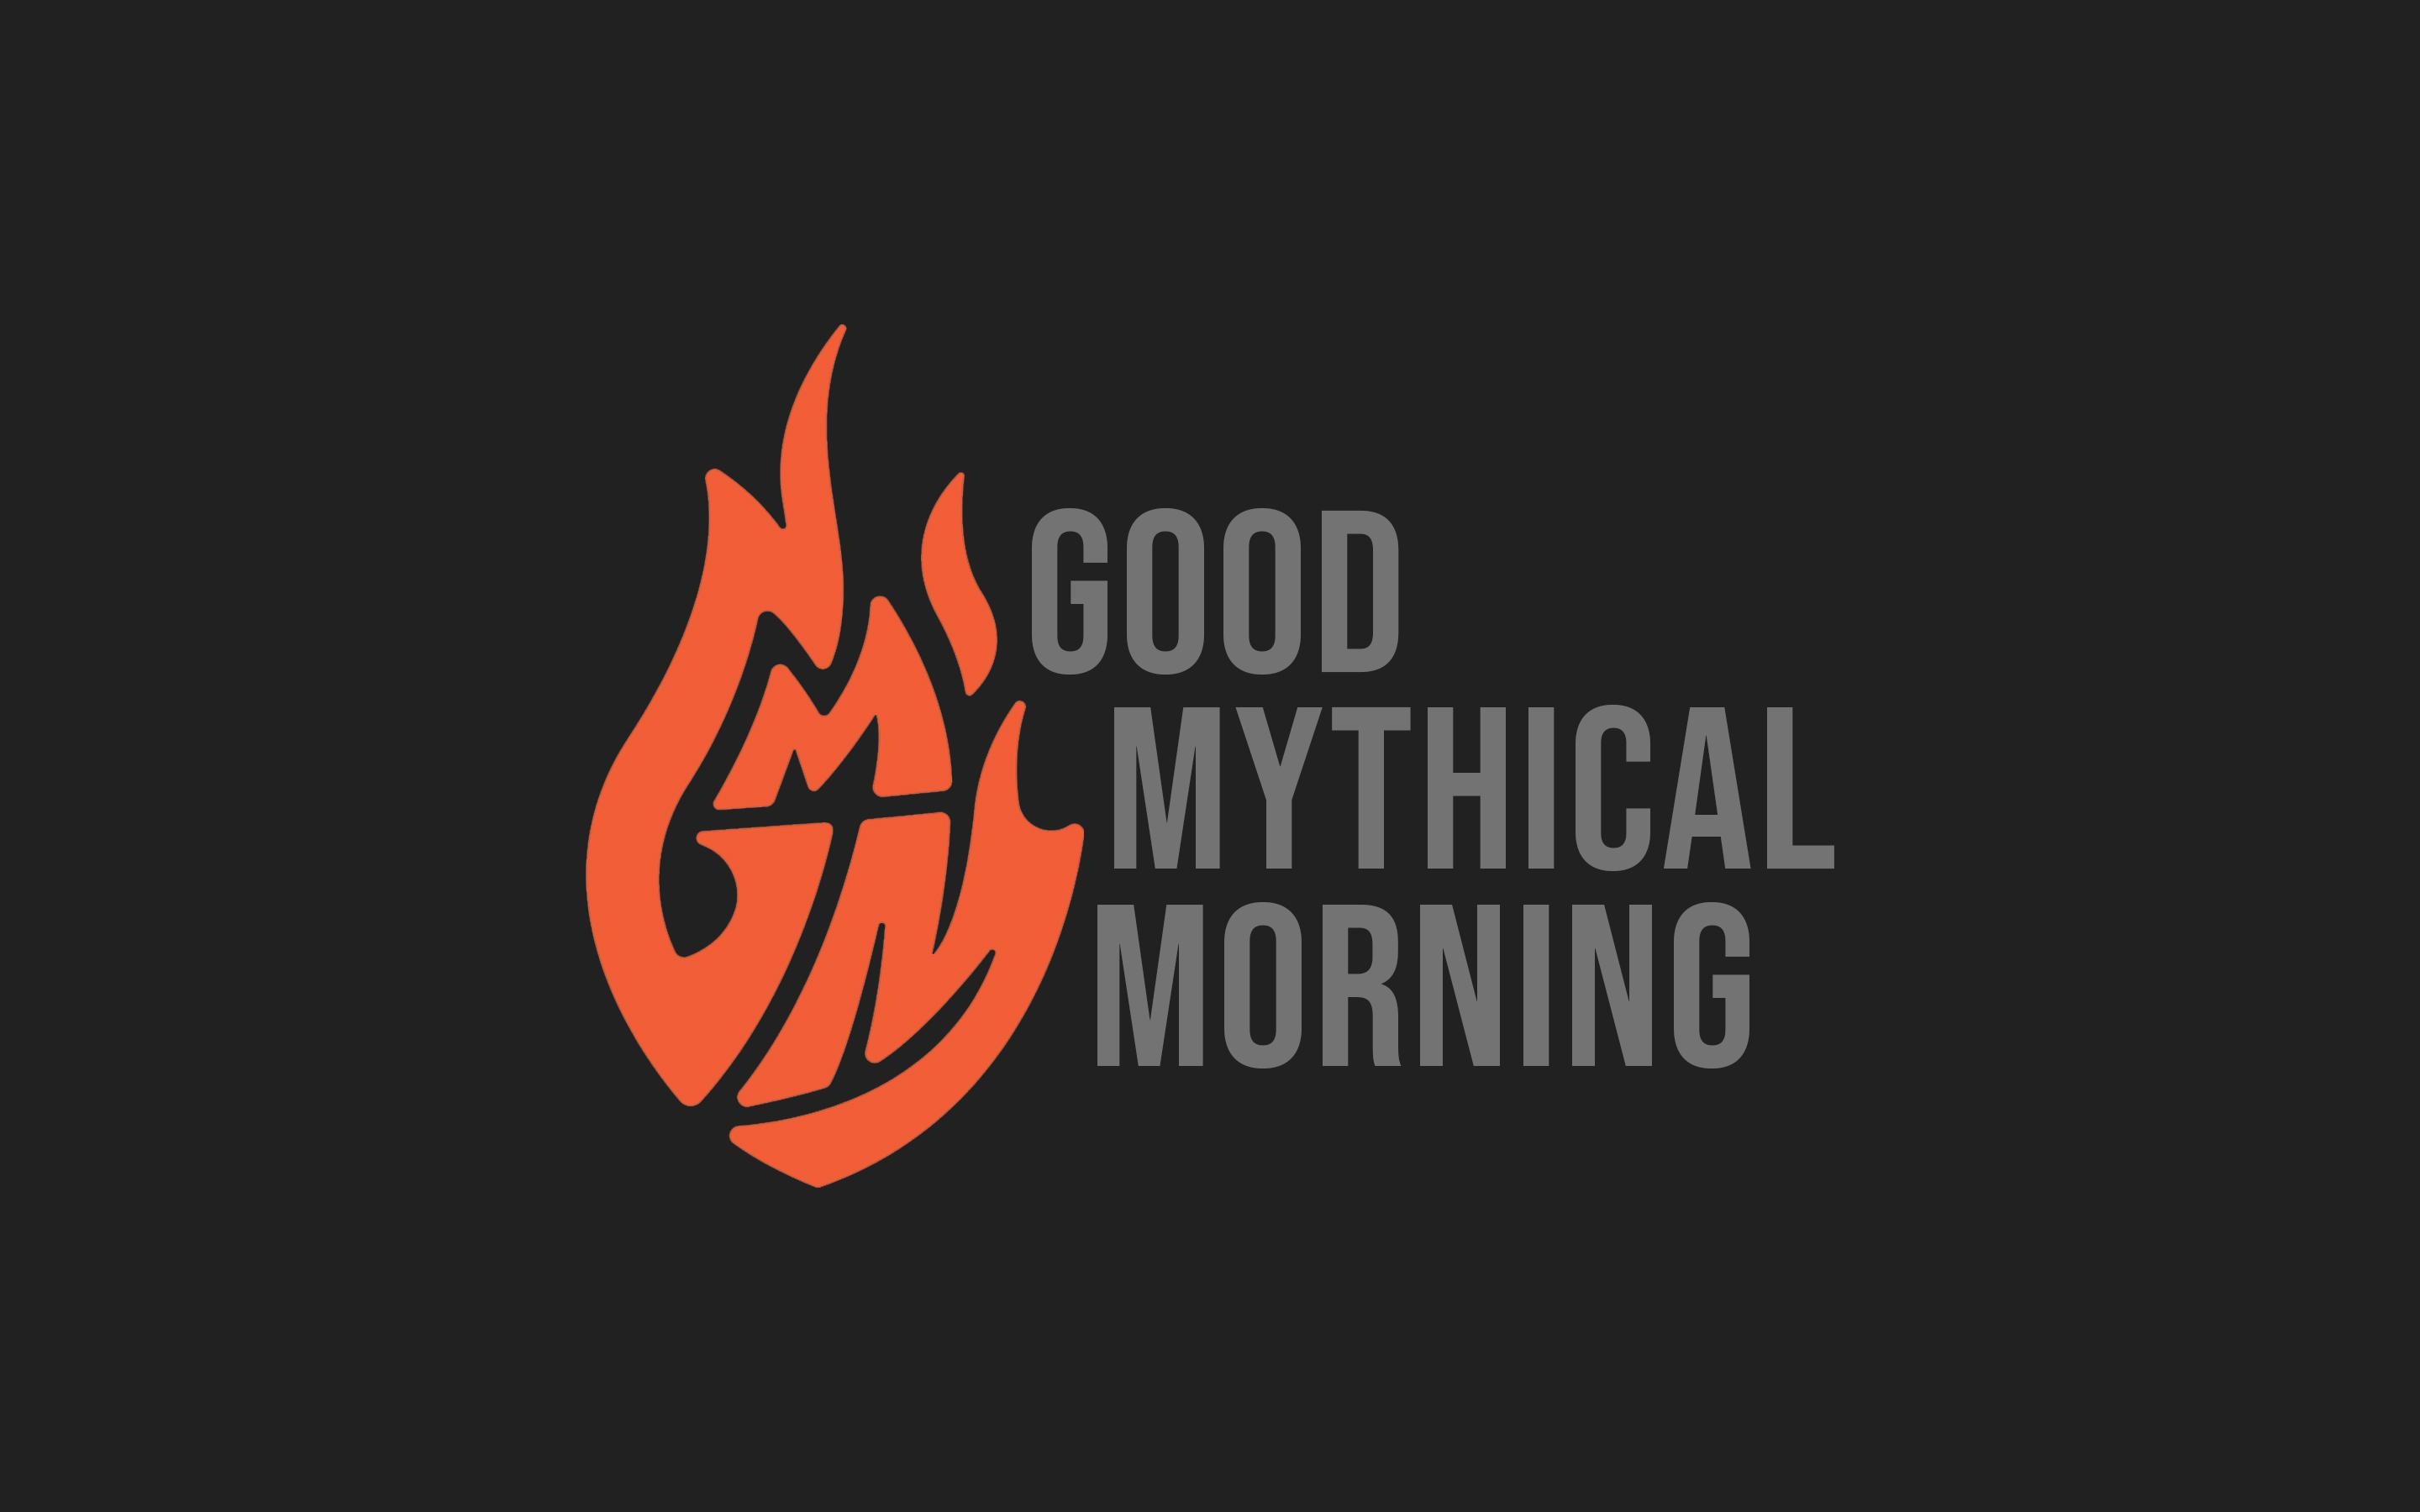 Good Mythical Morning: A daytime talk show hosted by Rhett and Link, Directed by Morgan Locke, First aired on 9, 2012. 2880x1800 HD Background.